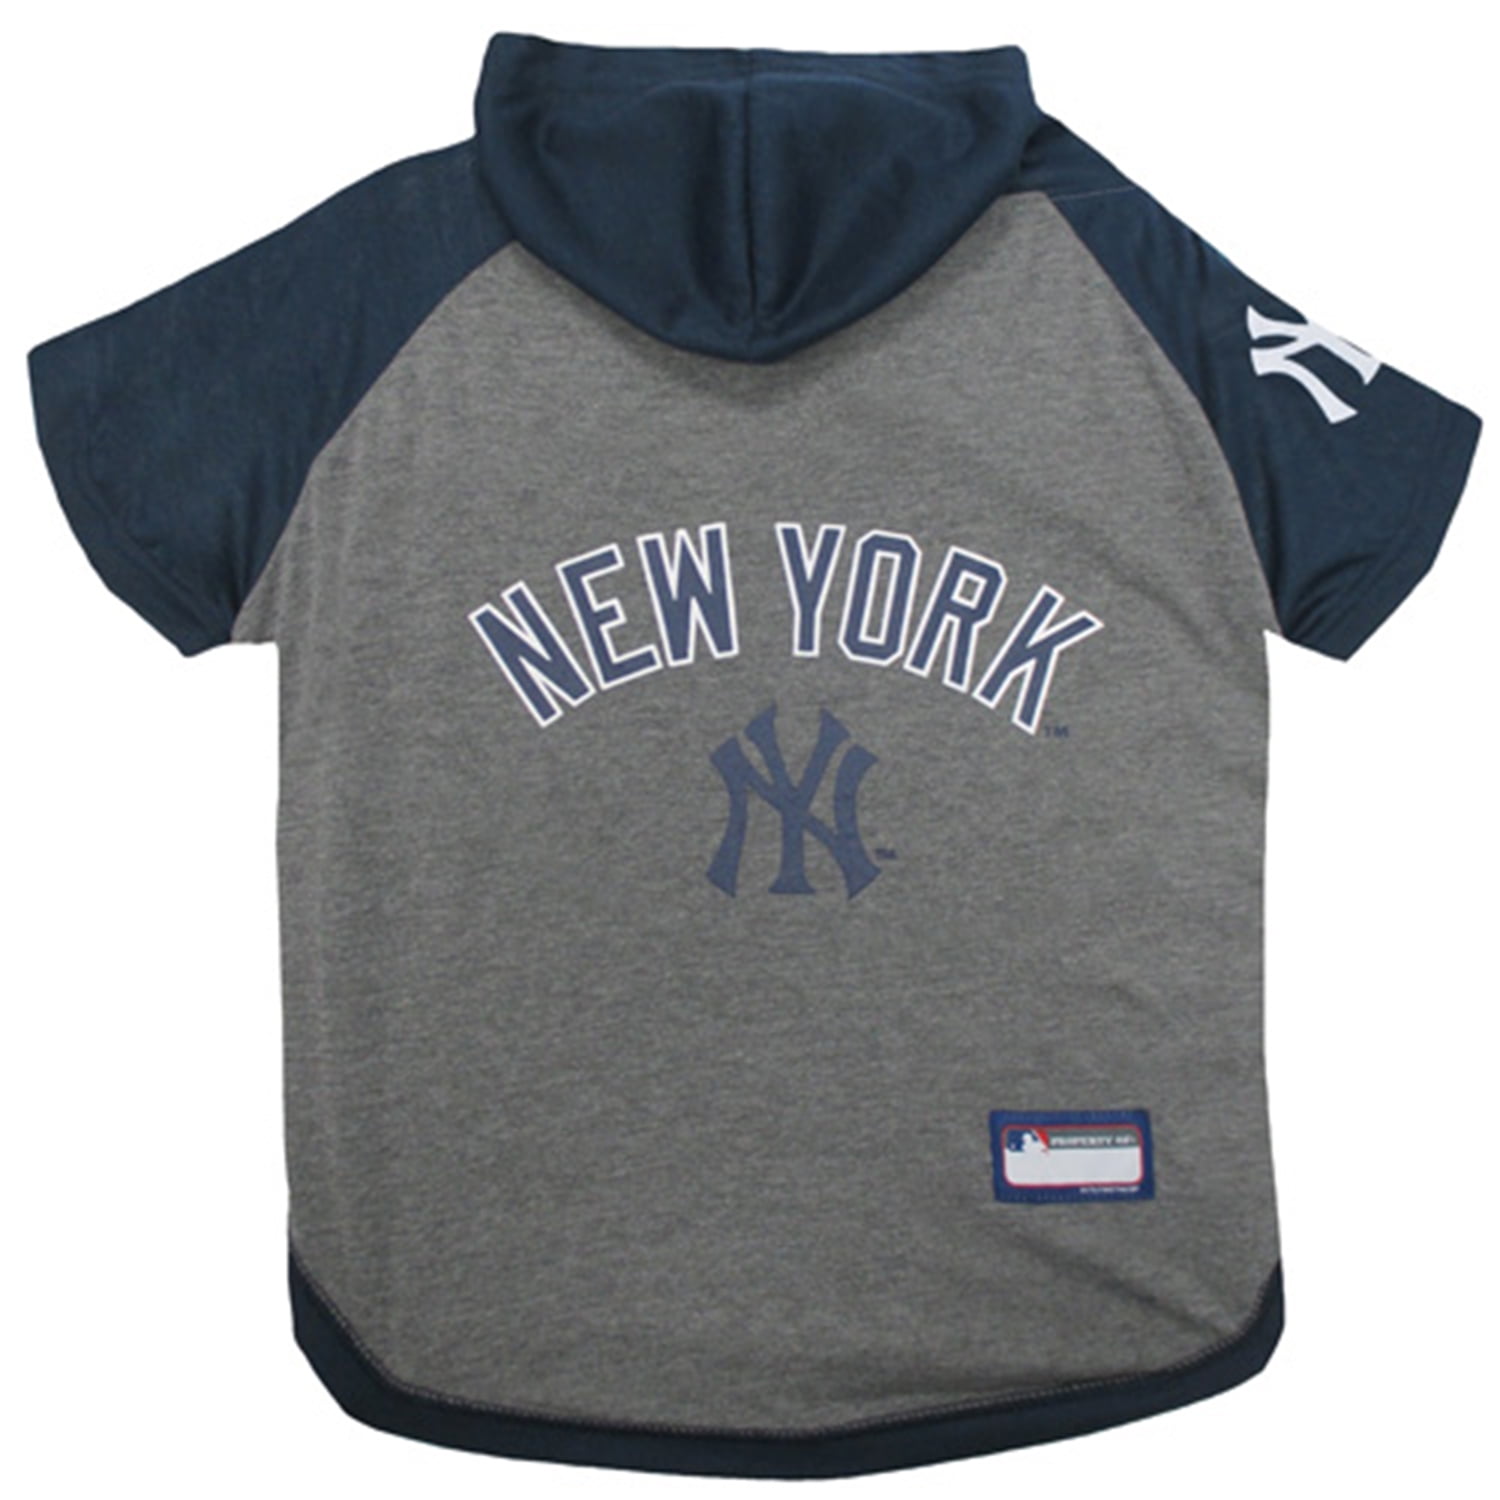 Pets First MLB New York Yankees Hoodie Tee Shirt for Dogs and Cats, Warm  and Comfort - Medium 